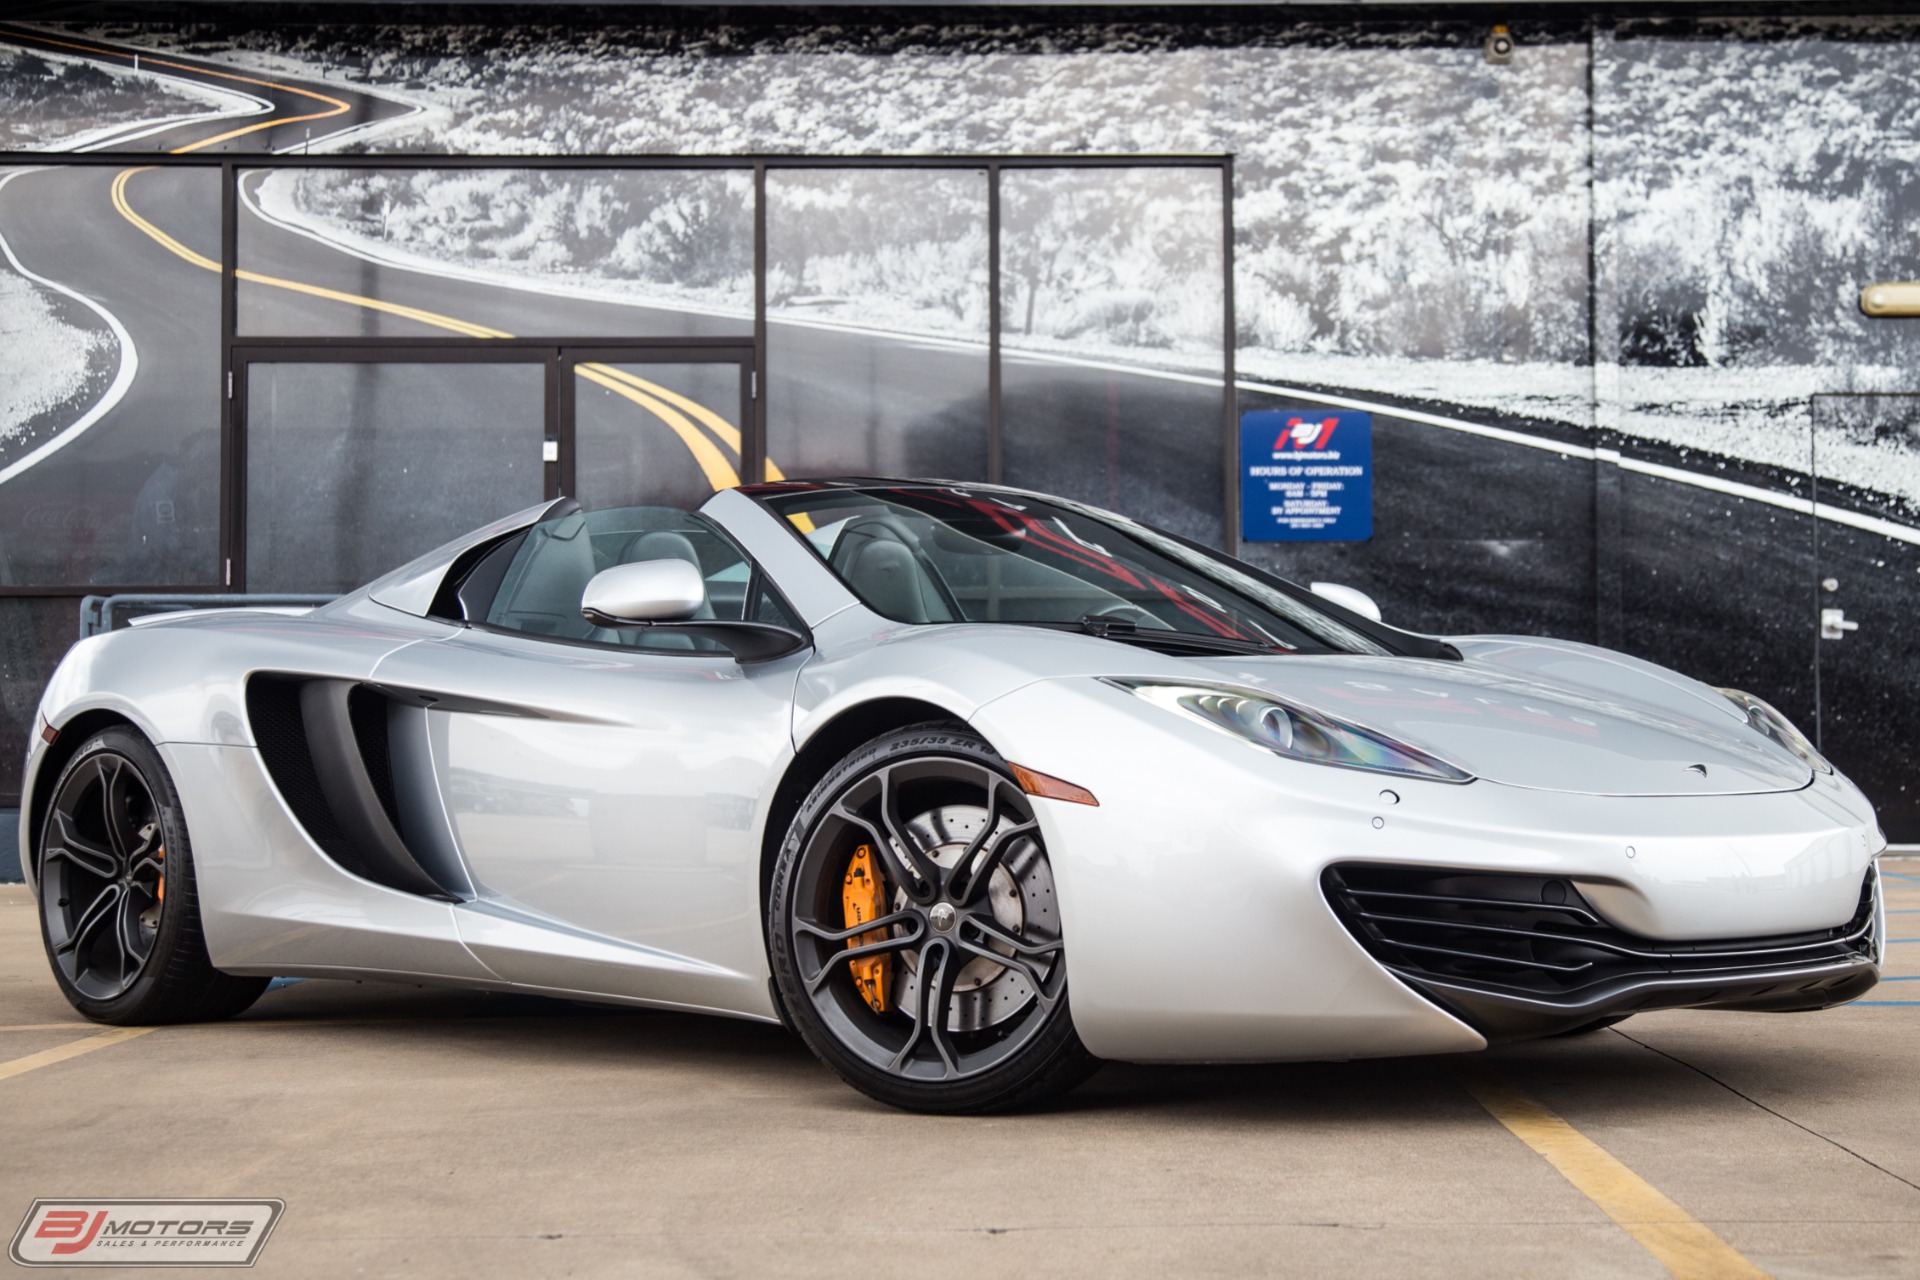 Used 2014 McLaren MP4-12C Spider For Sale (Special Pricing) | BJ Motors  Stock #EW003120